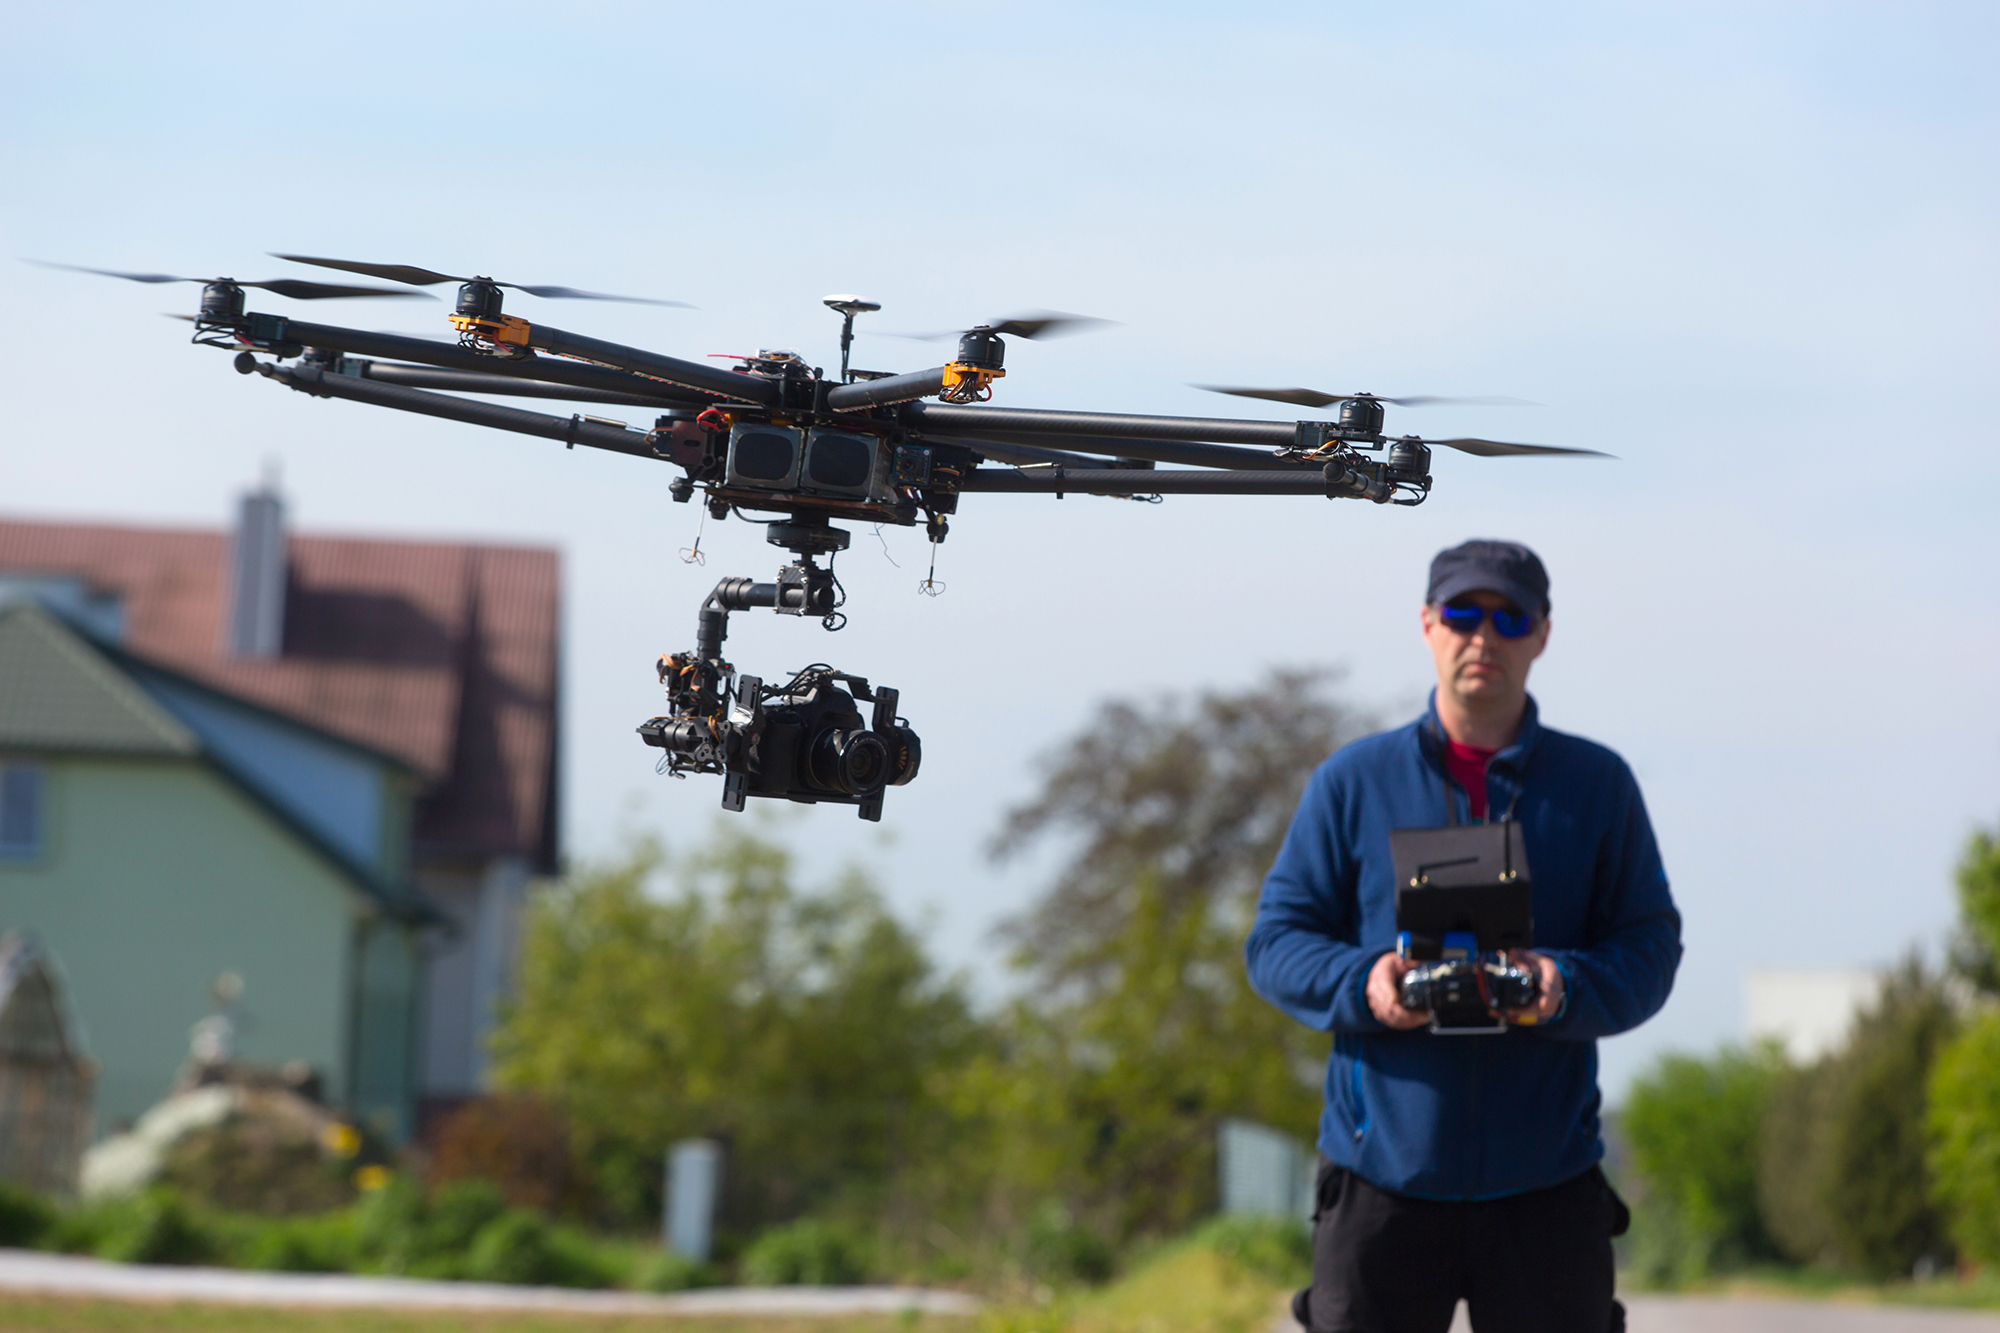 drones-need-to-be-registered